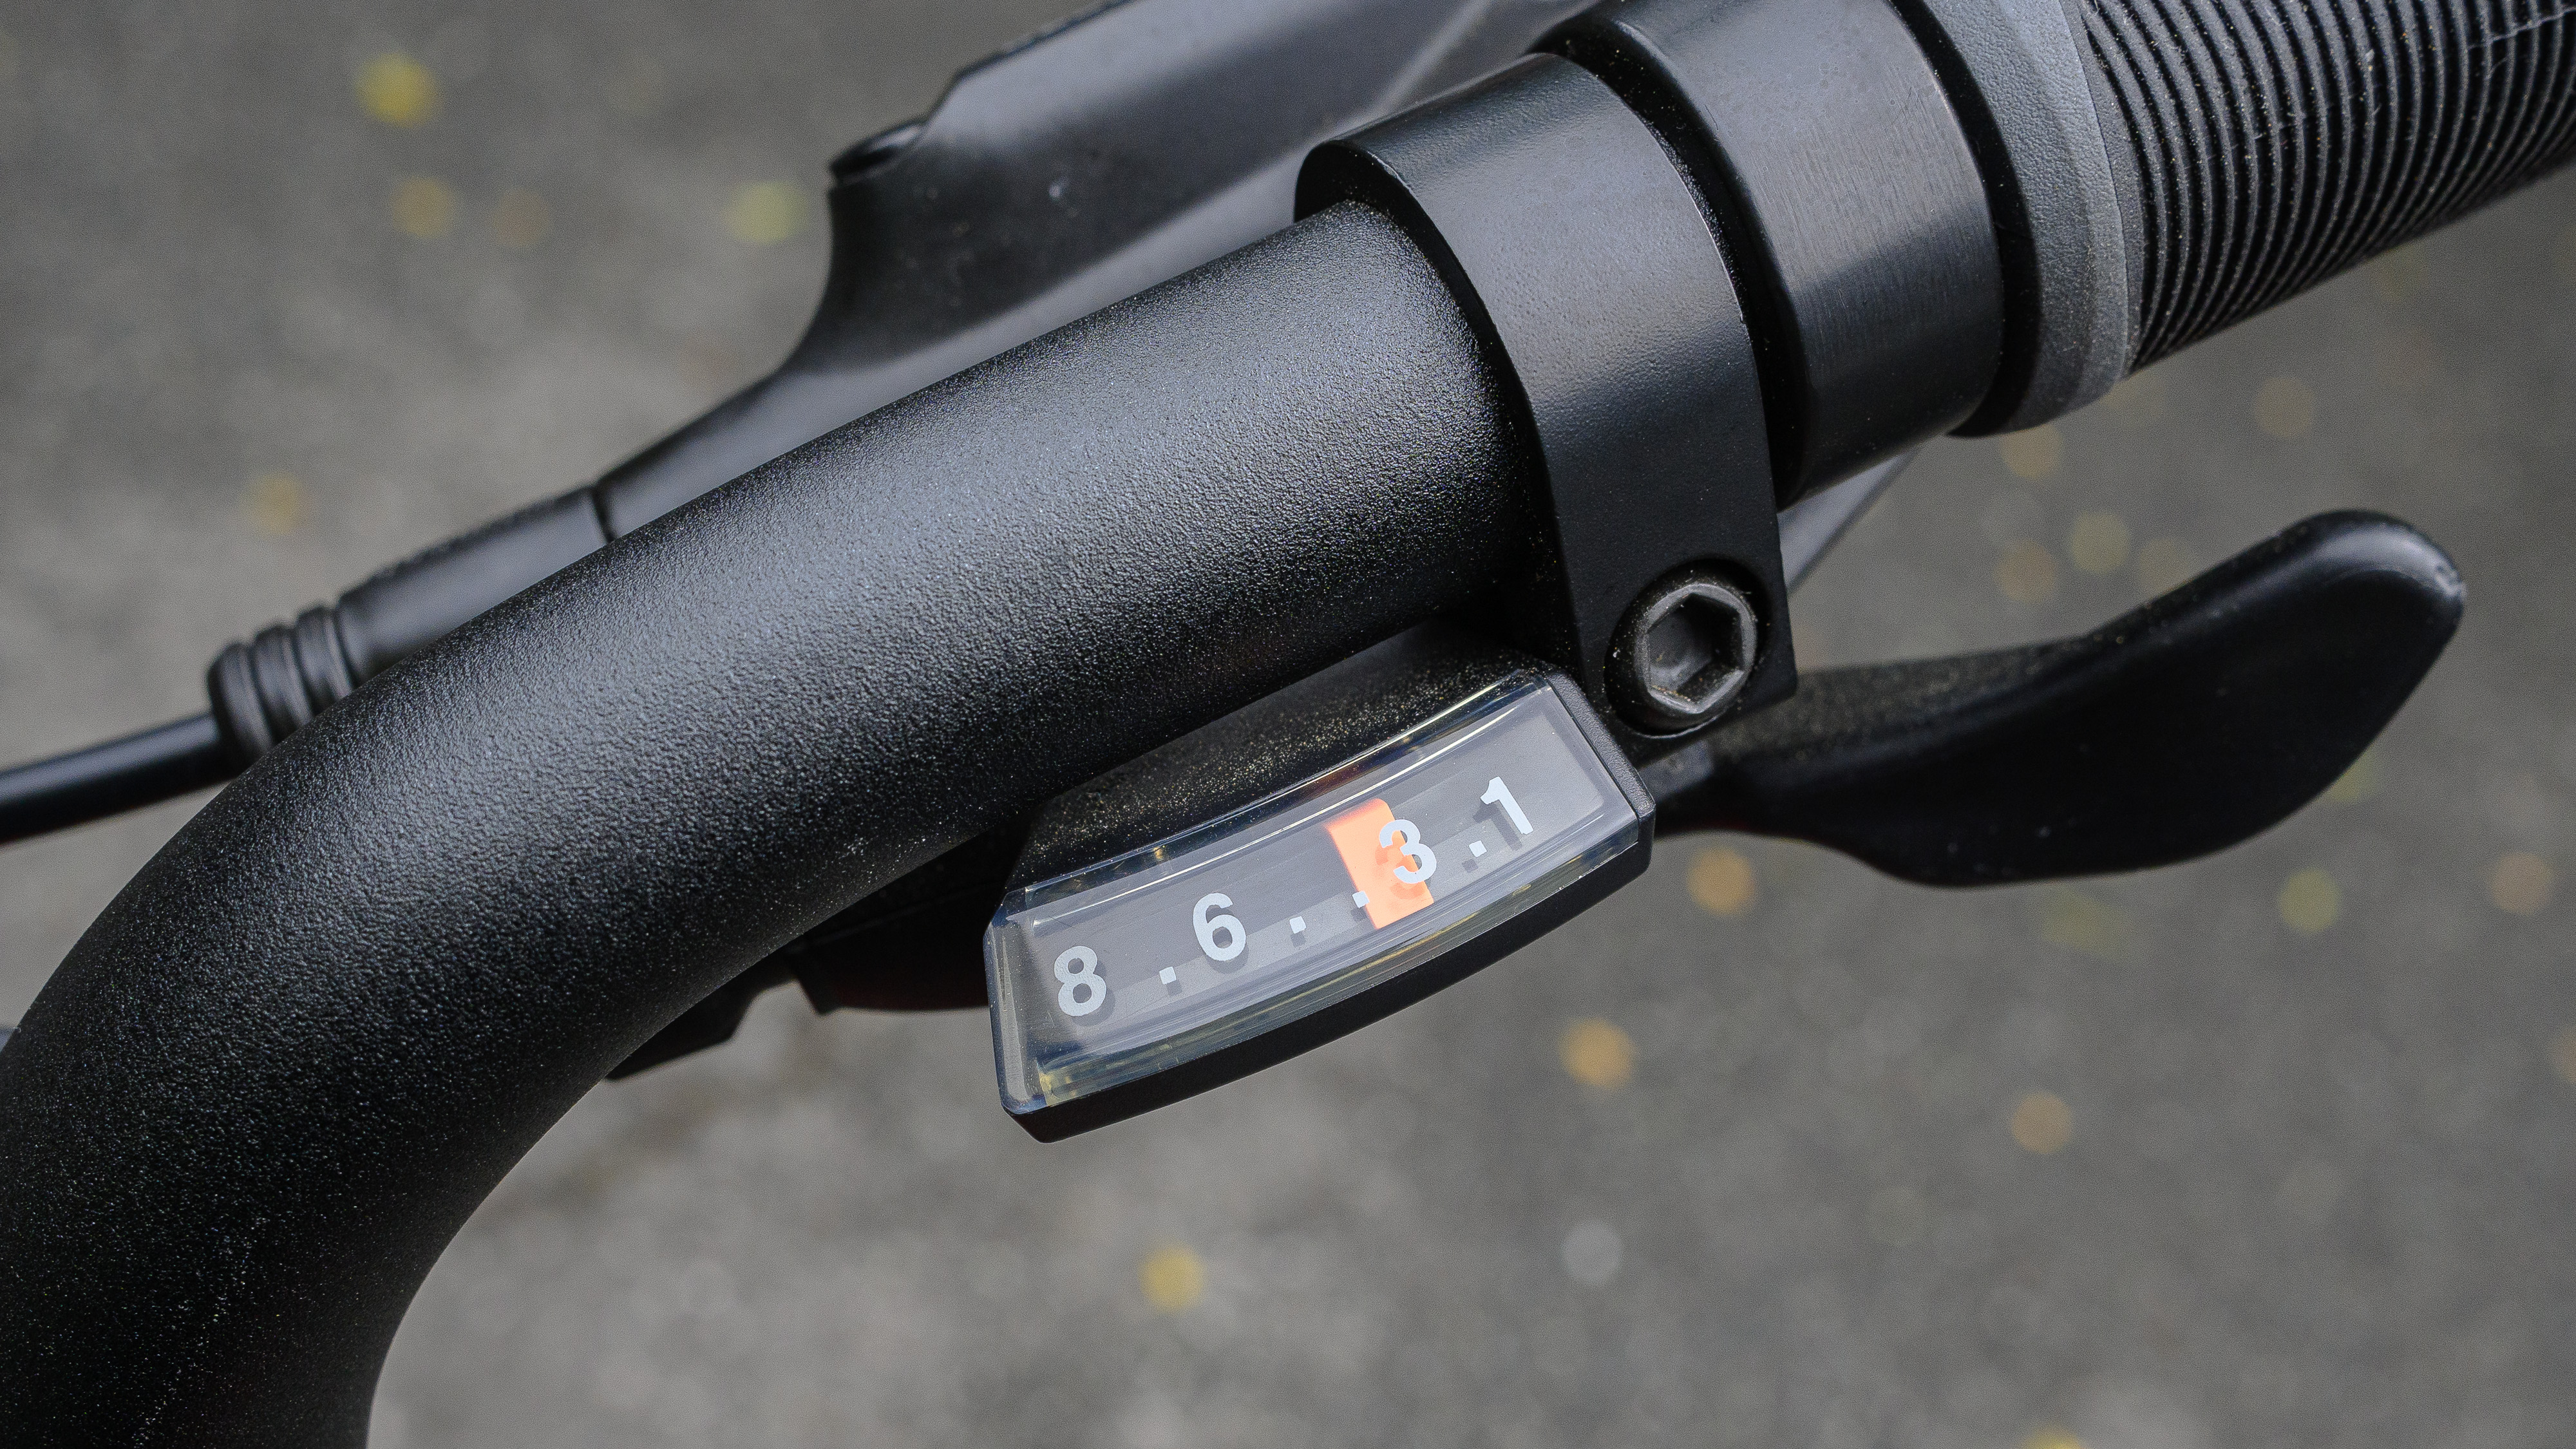 The gear adjuster on the Trek Verve+ 1 LT showing its eight different speeds.